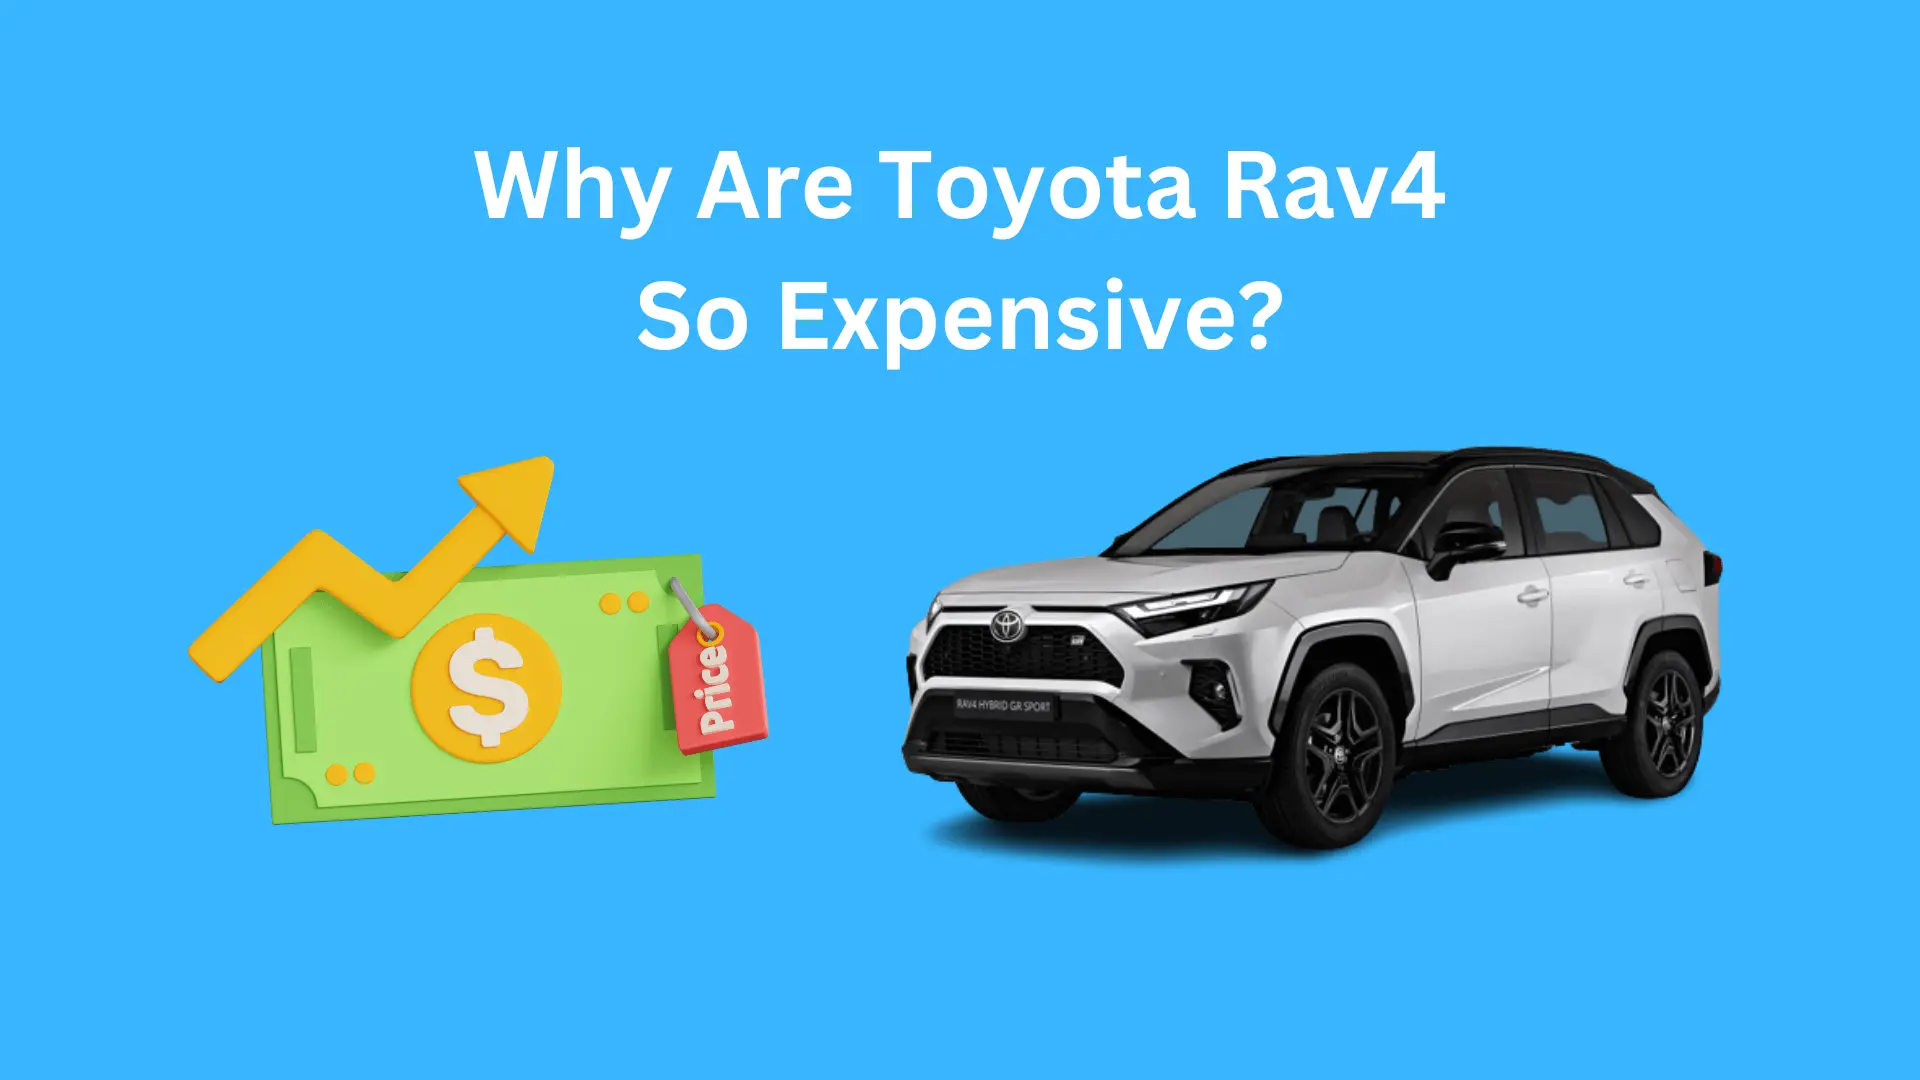 Why Are Toyota Rav4 So Expensive?